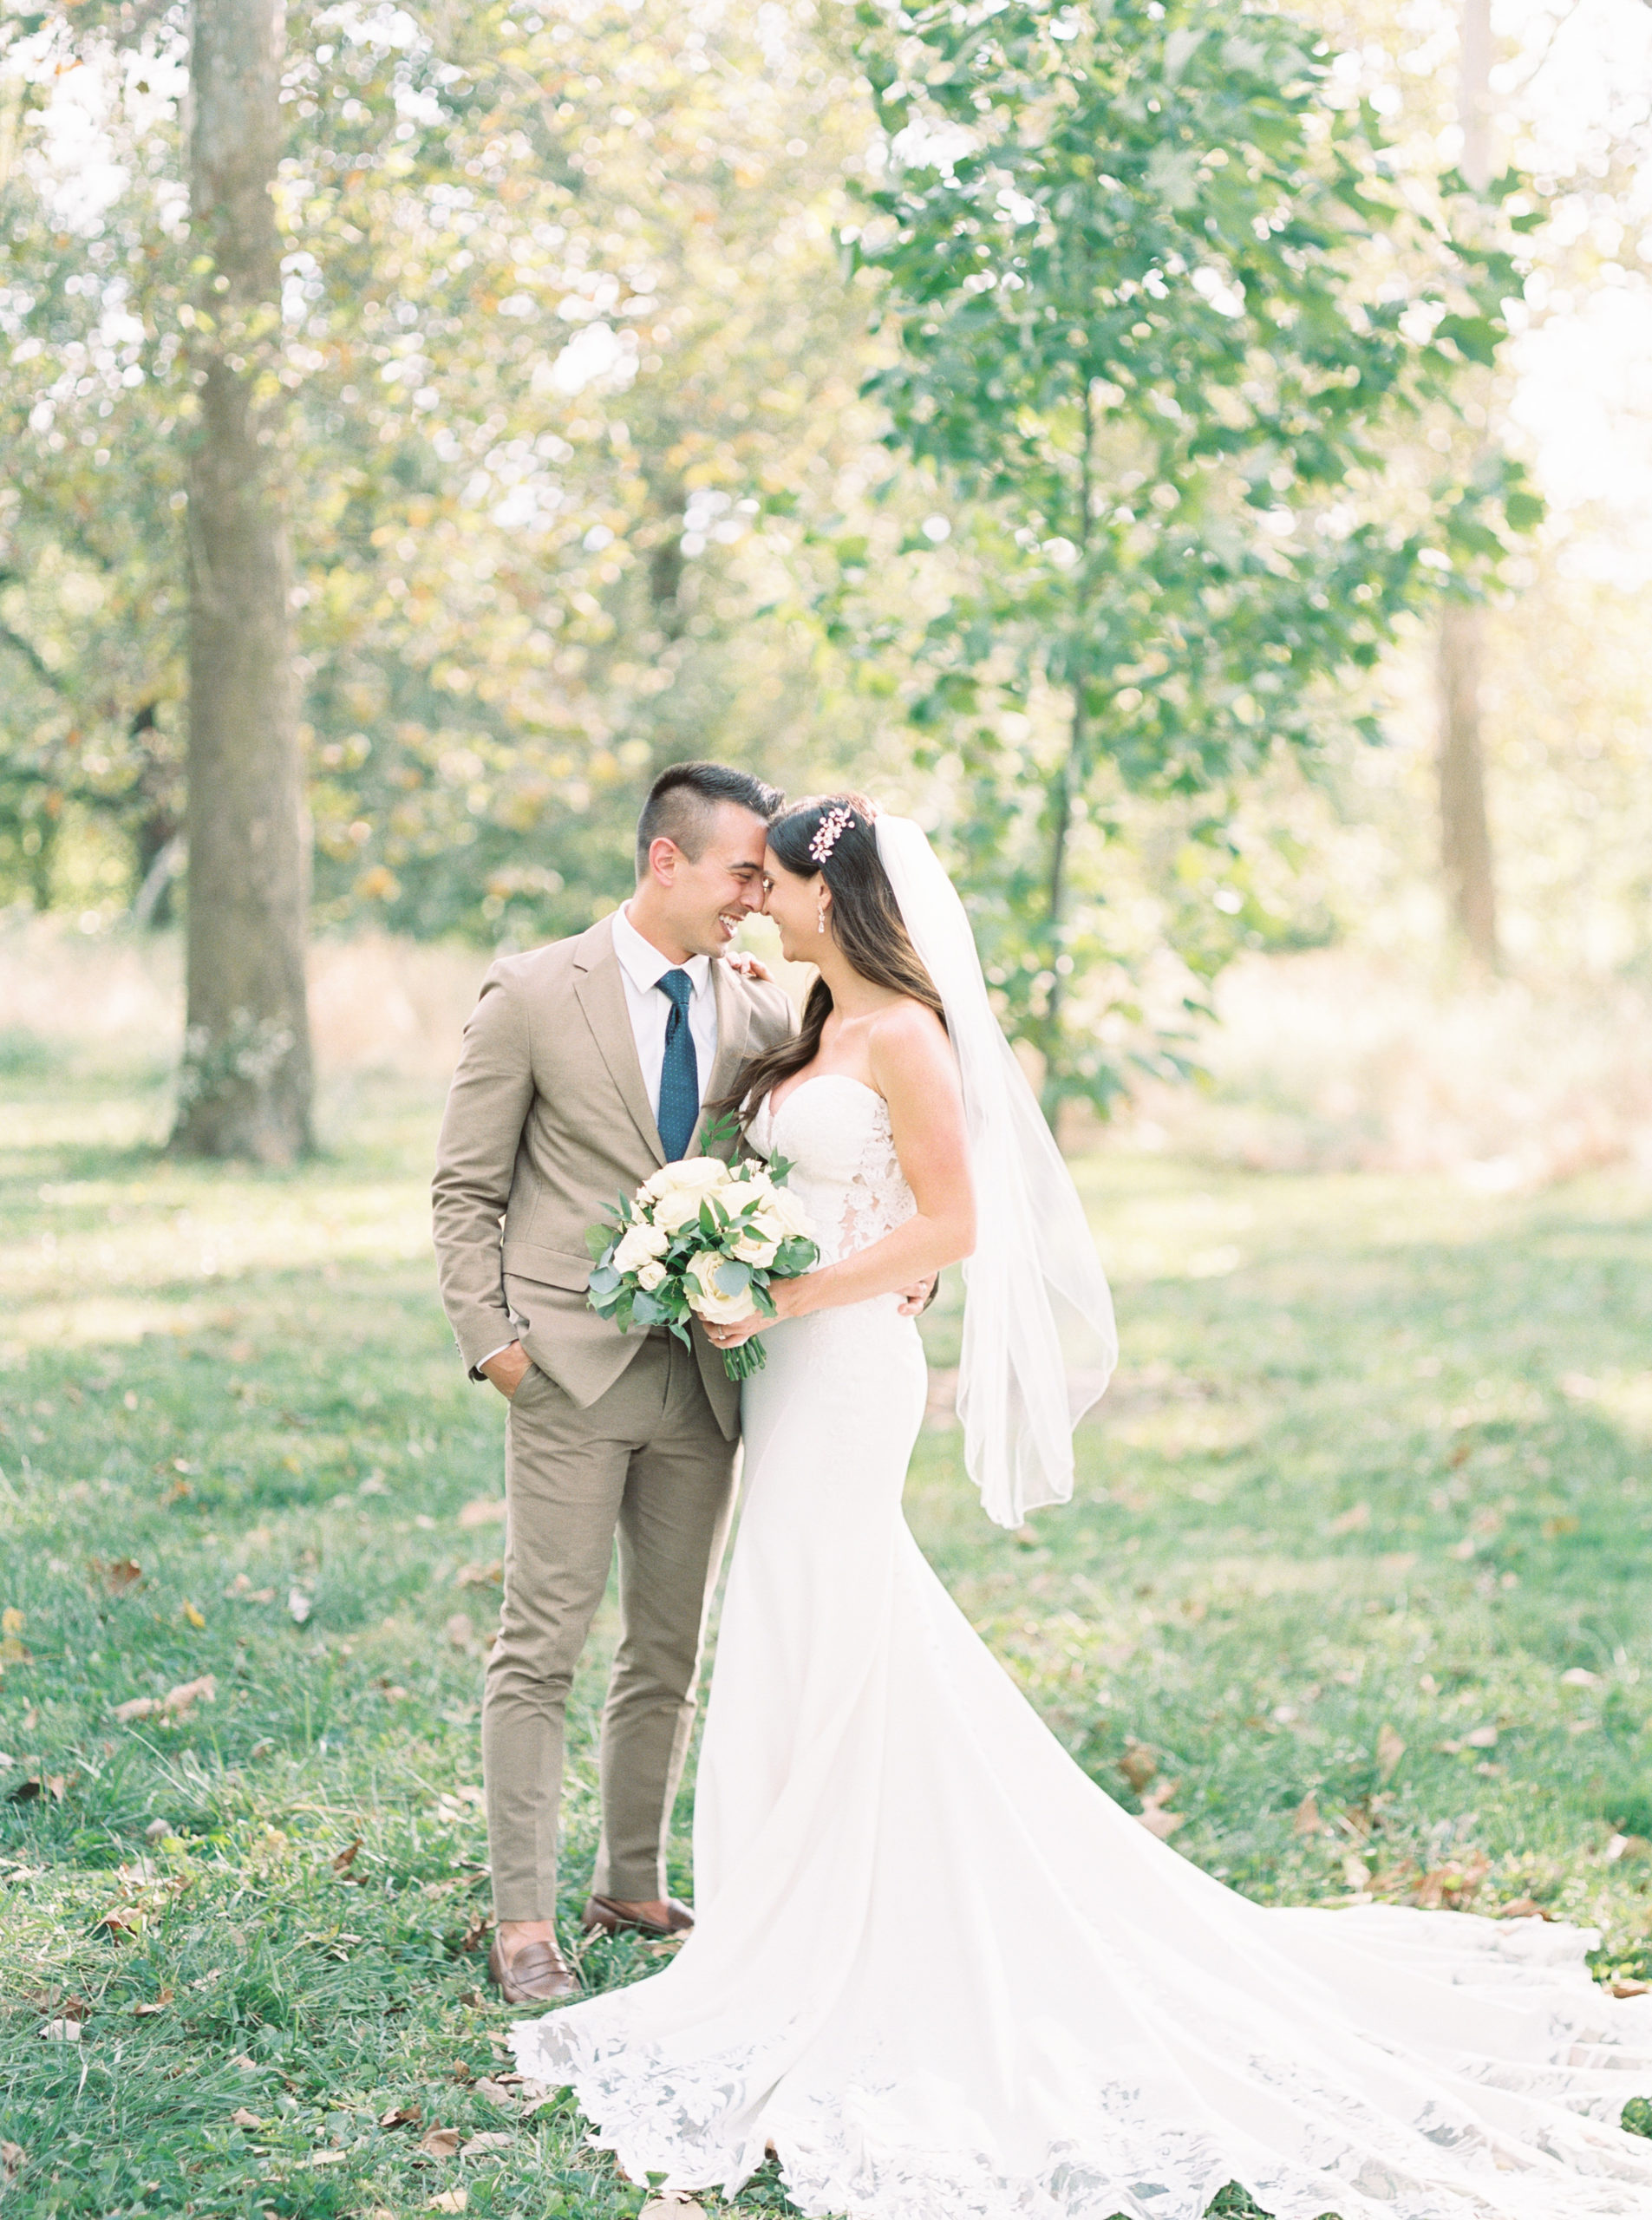 St Louis forest park intimate wedding ceremony in the fall